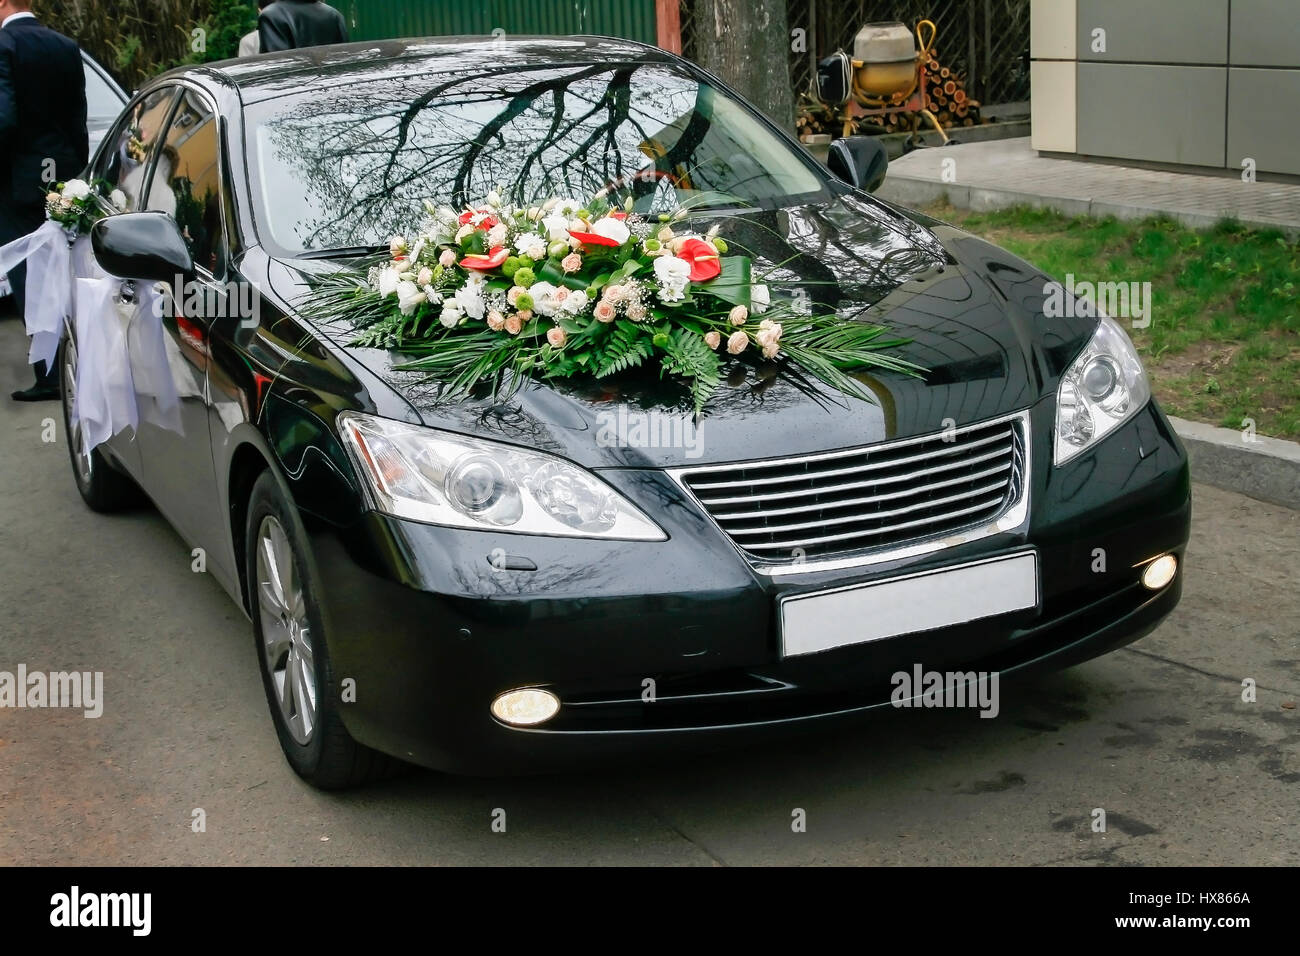 The hood of a black car is decorated with a bouquet of flowers in